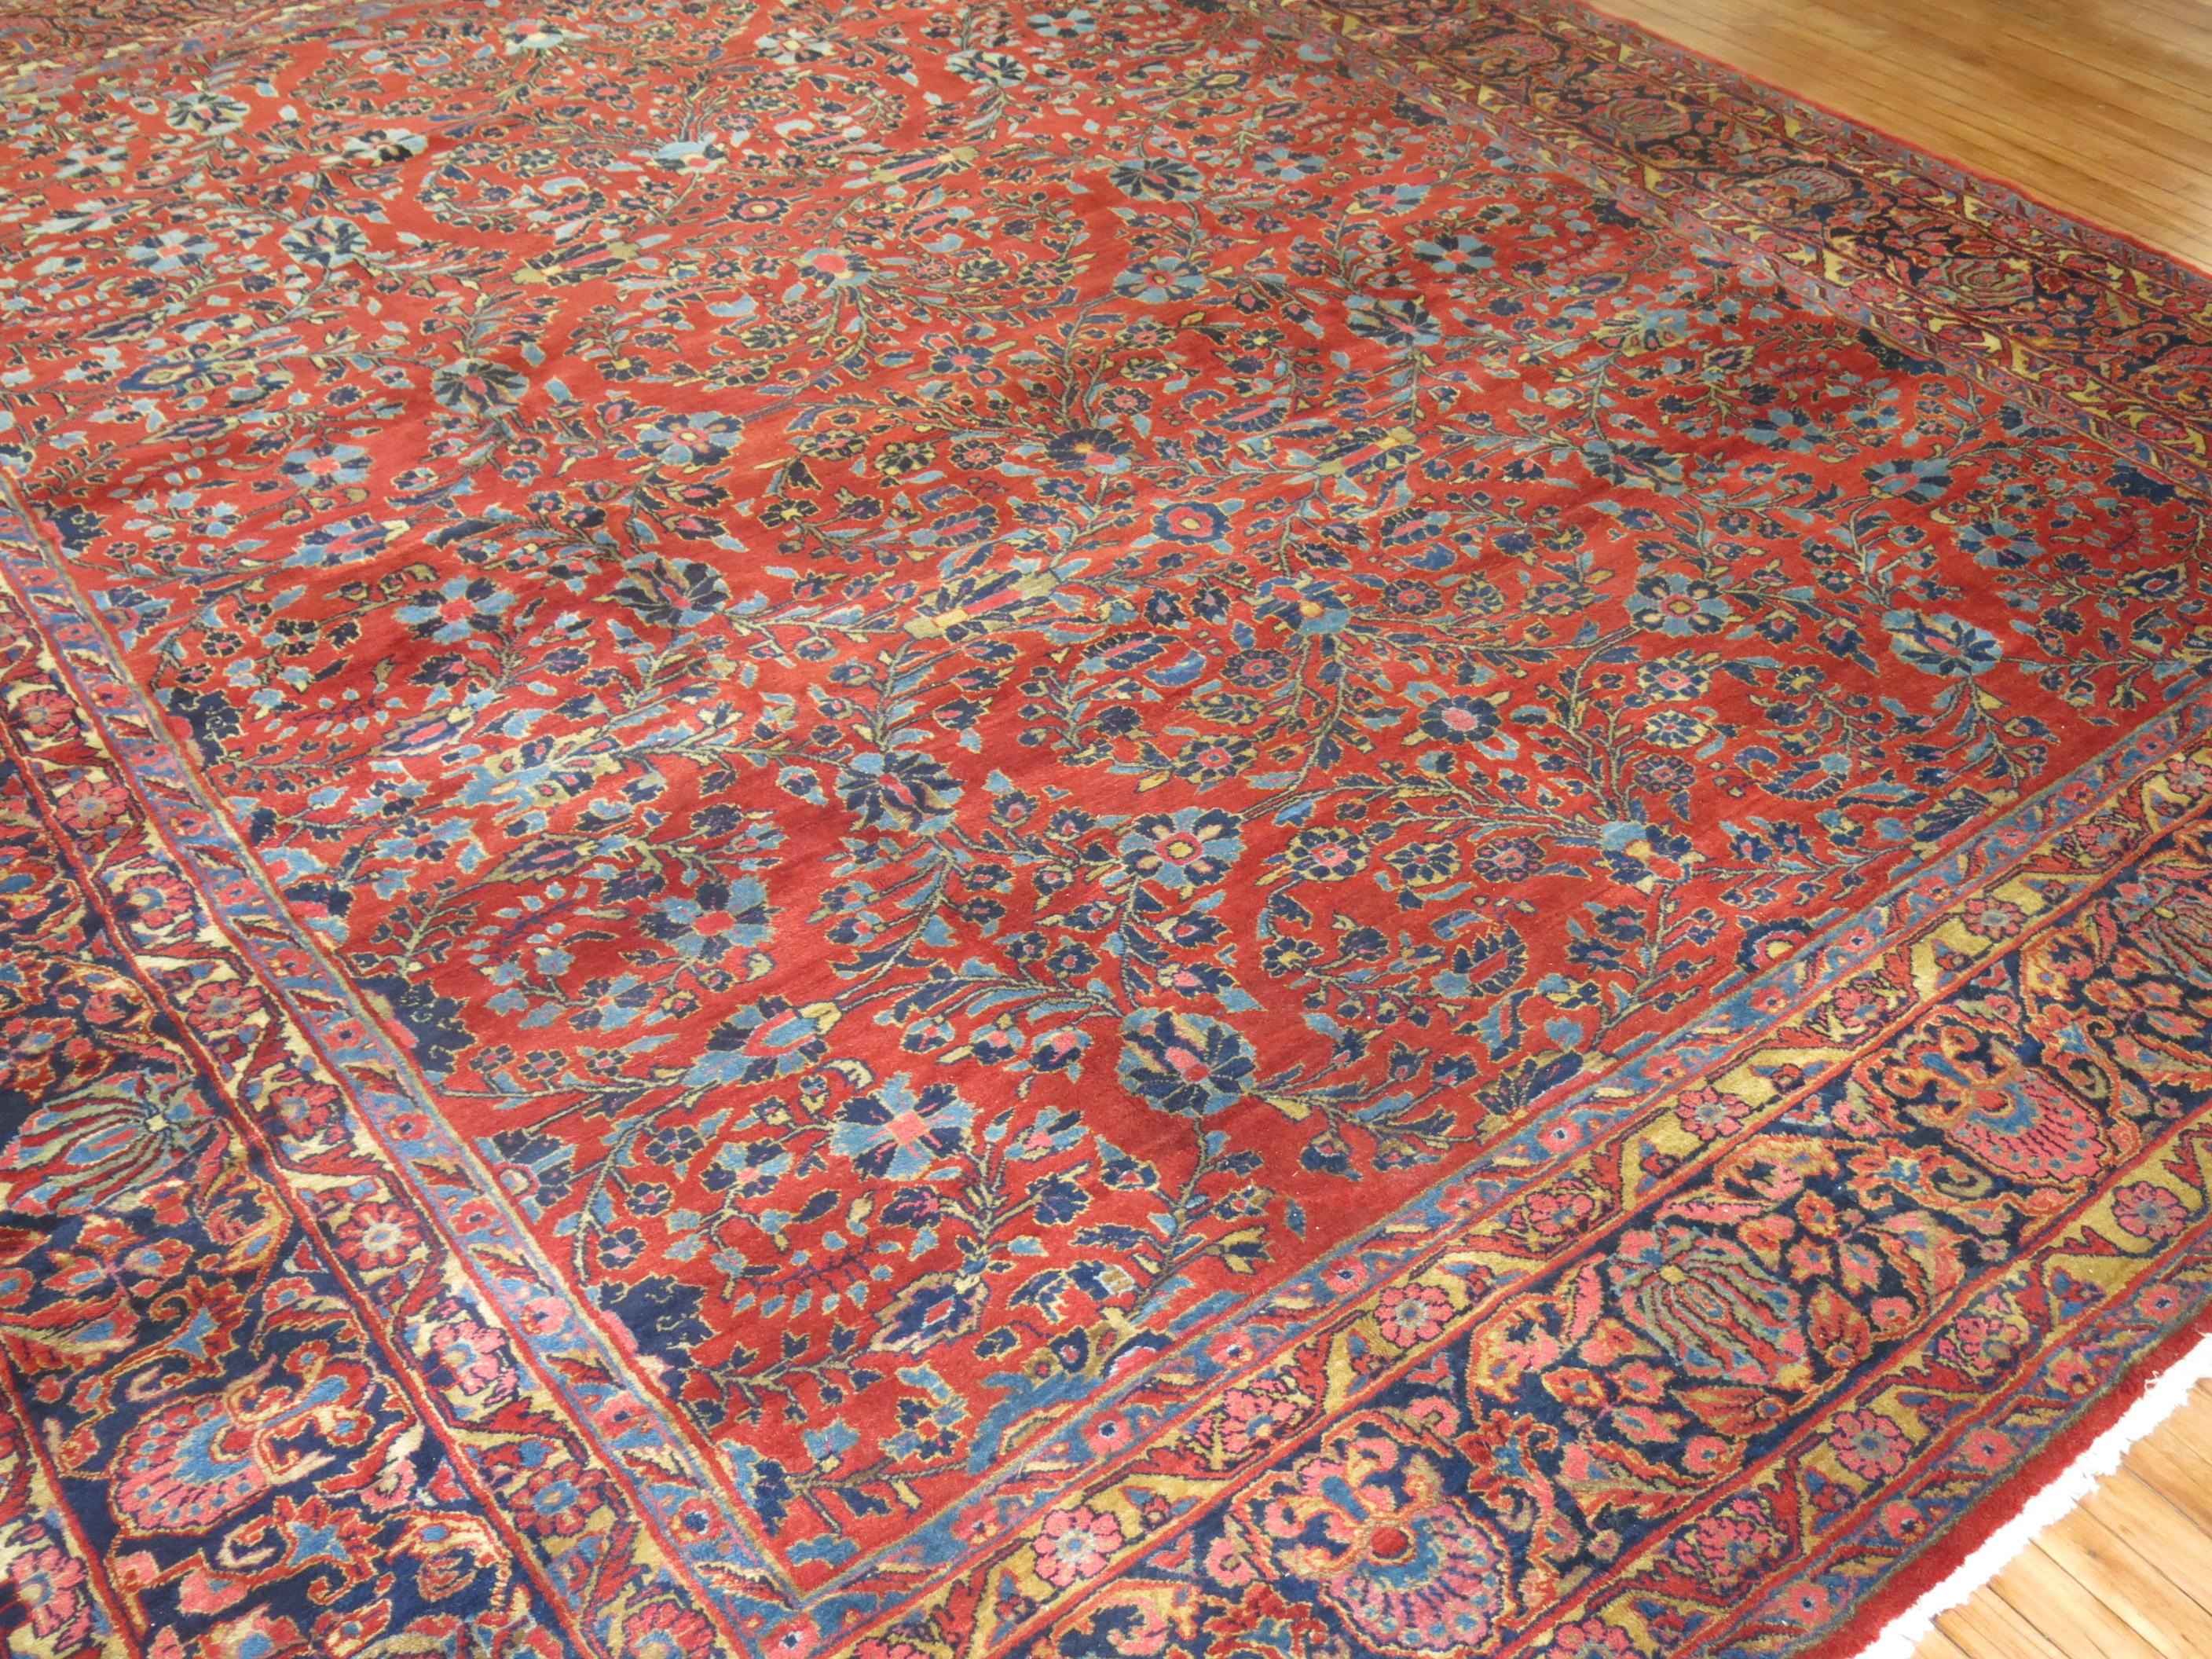 early 20th-century Persian Mehraban red and blue room-size square rug

Details
rug no.	r4138
size	11' 1